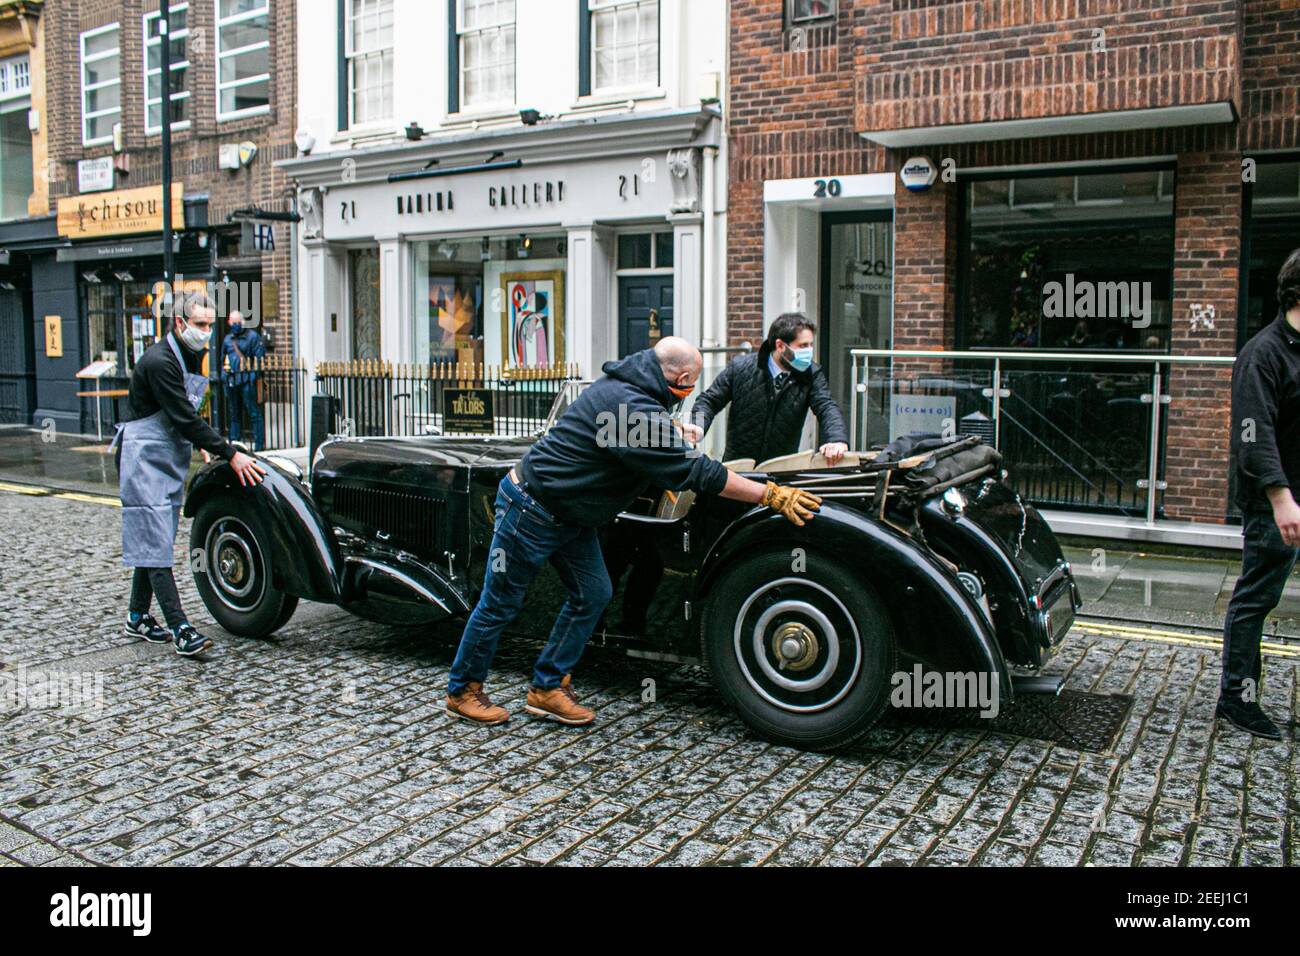 BONHAMS LONDON, UK 16 February 2021. Staff rollout the  1937 Bugatti Type 57S, one of the world’s most valuable and desirable pre-war motor cars, with an estimate of £5,000,000 - 7,000,000 which has been hidden for the past 50 years is offered for the first time at auction. It was owned by  Sir Malcolm Campbell, of the ‘Bluebird’ world land and water speed records fame, only 42 examples of the 57S variants were produced and it was the fastest road car of its day. Credit amer ghazzal/Alamy Live News Stock Photo